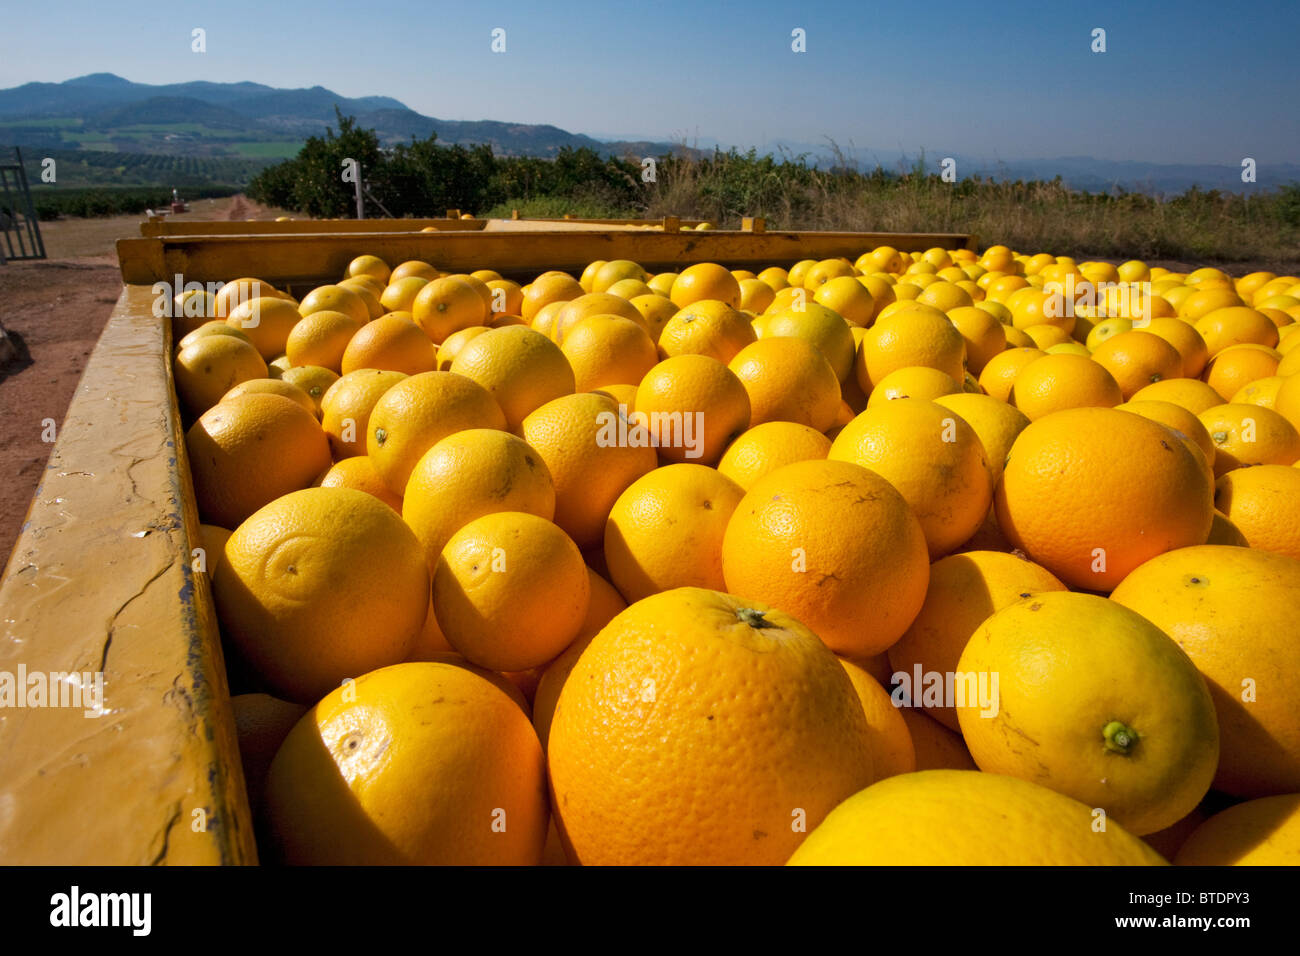 Oranges in a harvesting trailer being transported to a packing shed Stock Photo